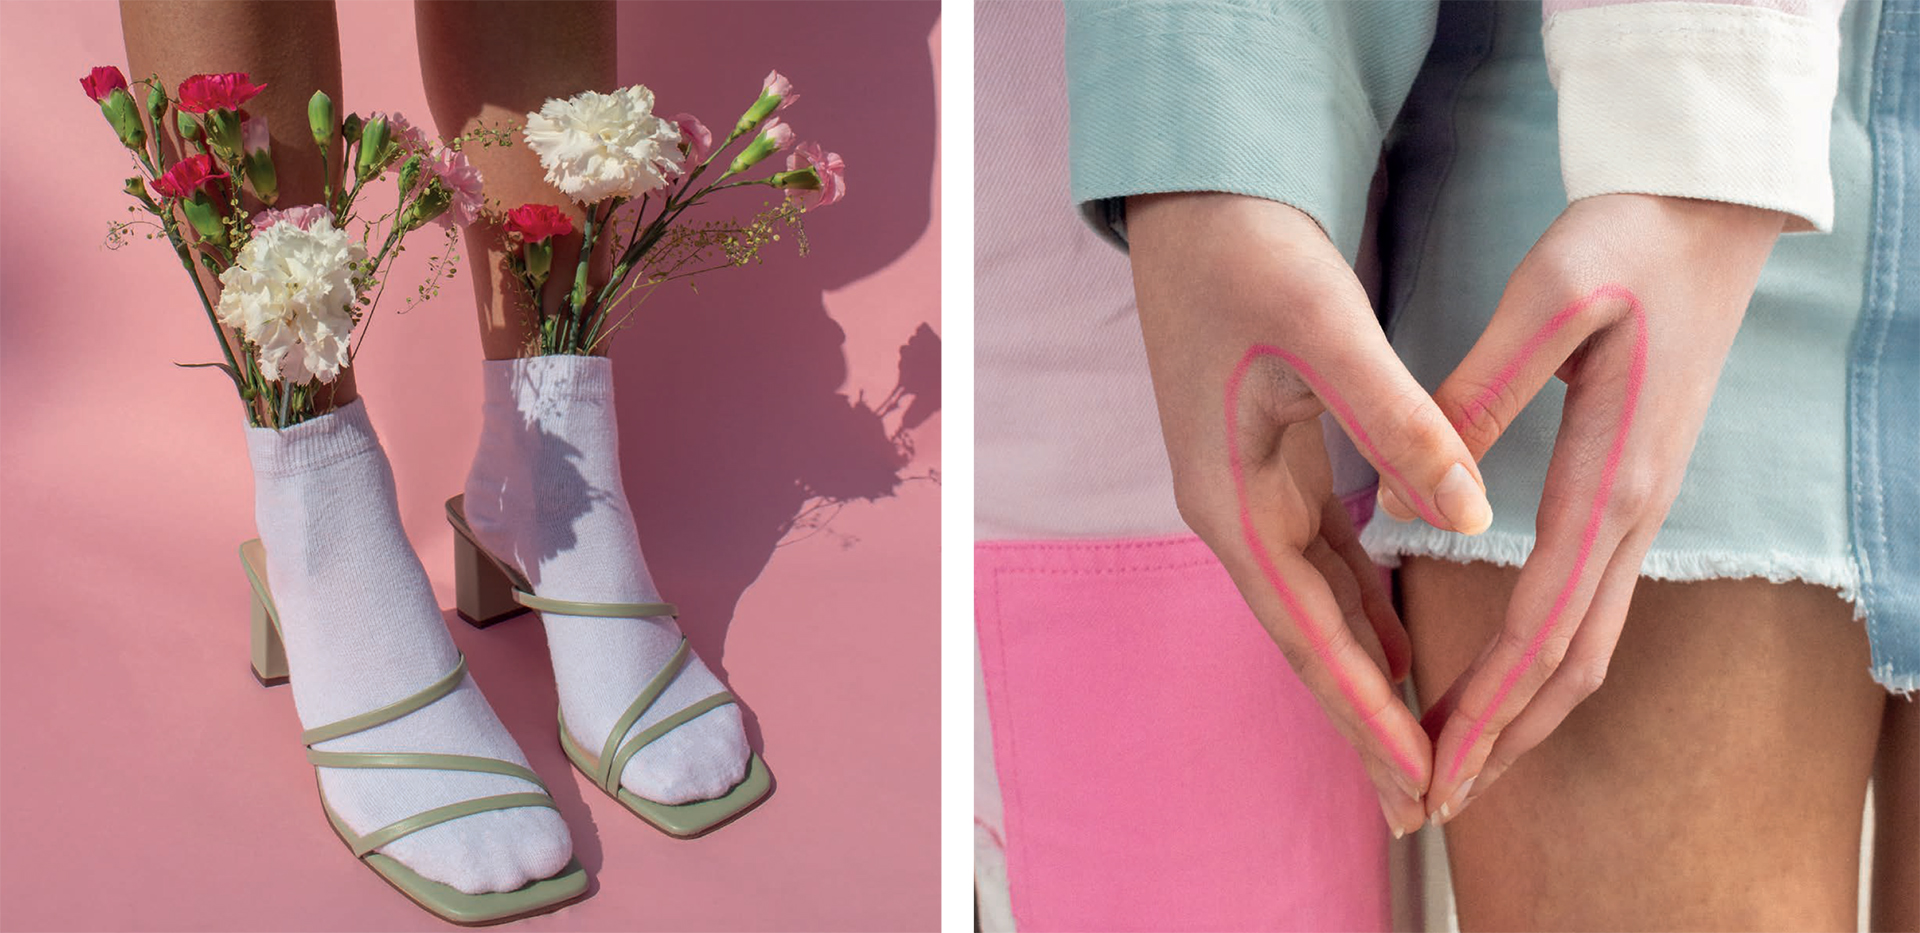 Image shows shoes with flowers in, and two hands together creating a heart 